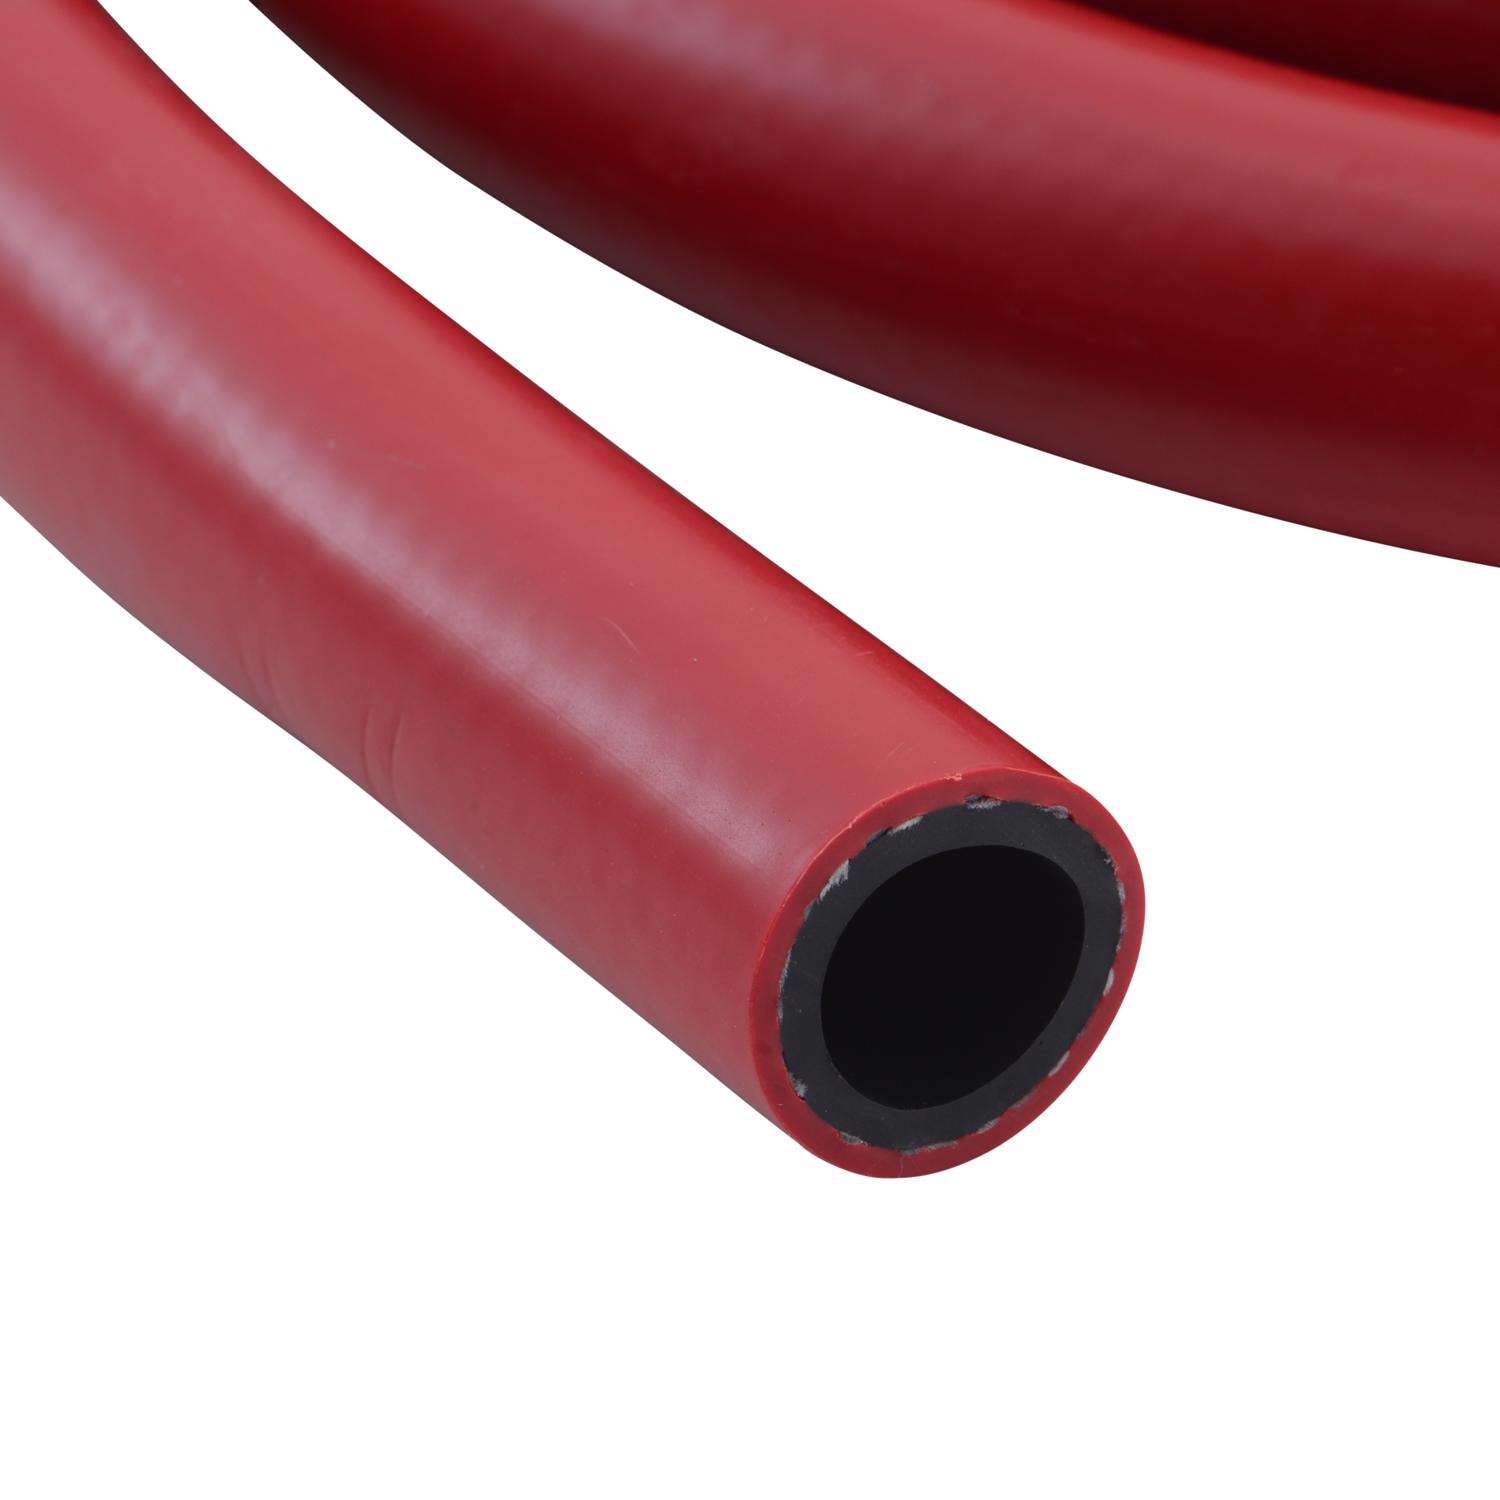 Air Compressor Hose: Rubber & Poly Air Hose at Ace Hardware - Ace Hardware